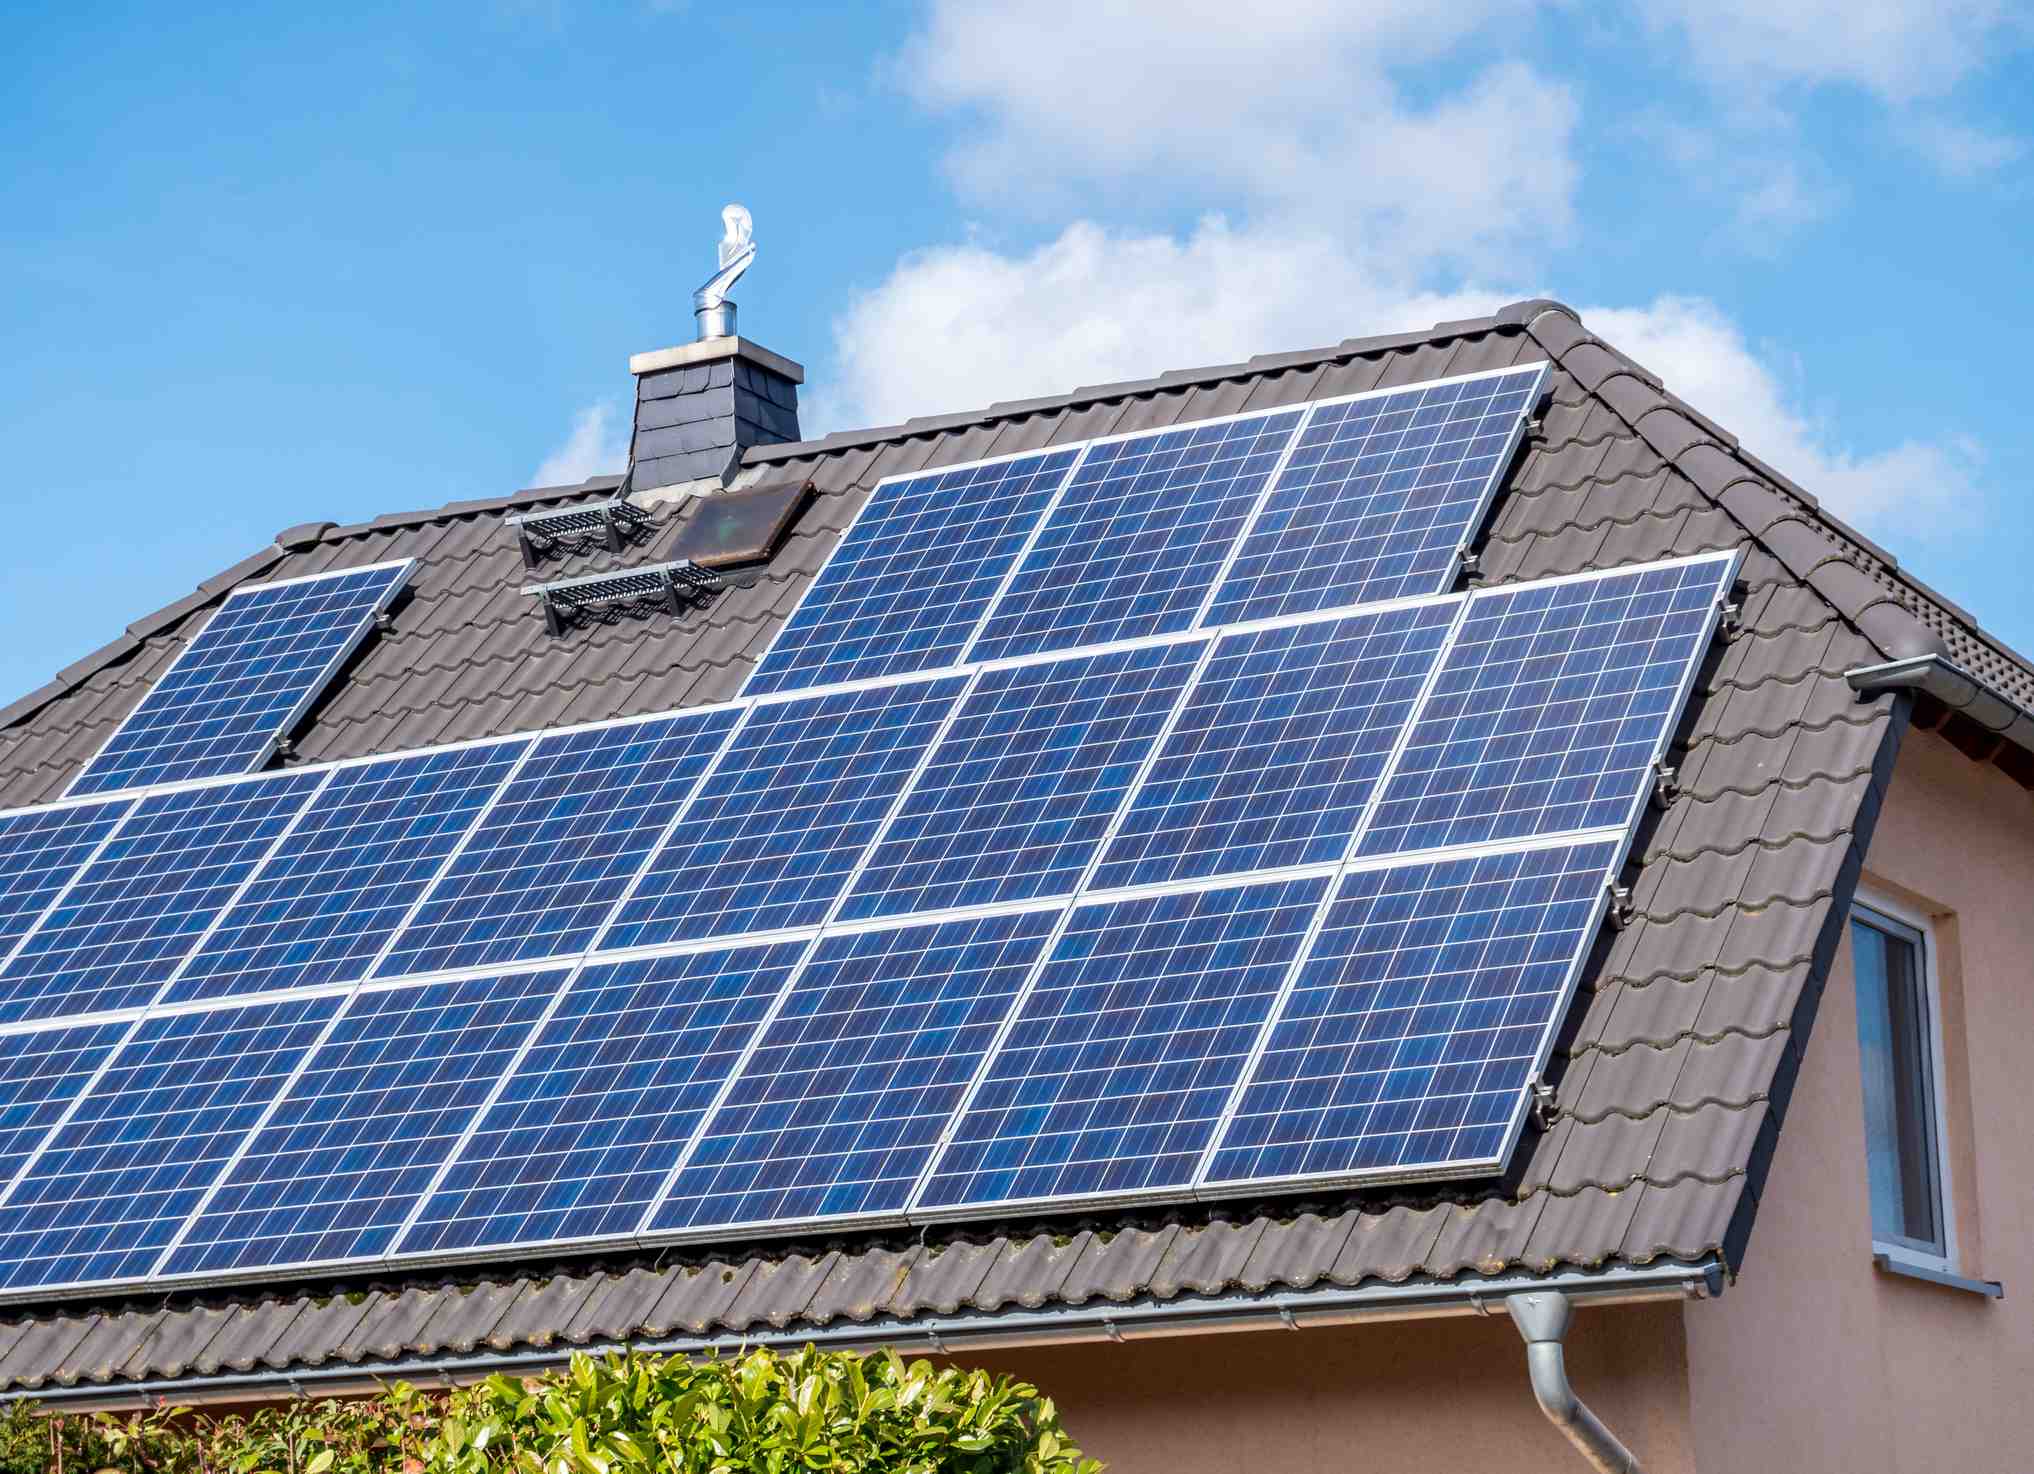 Can you install solar panels without planning permission?